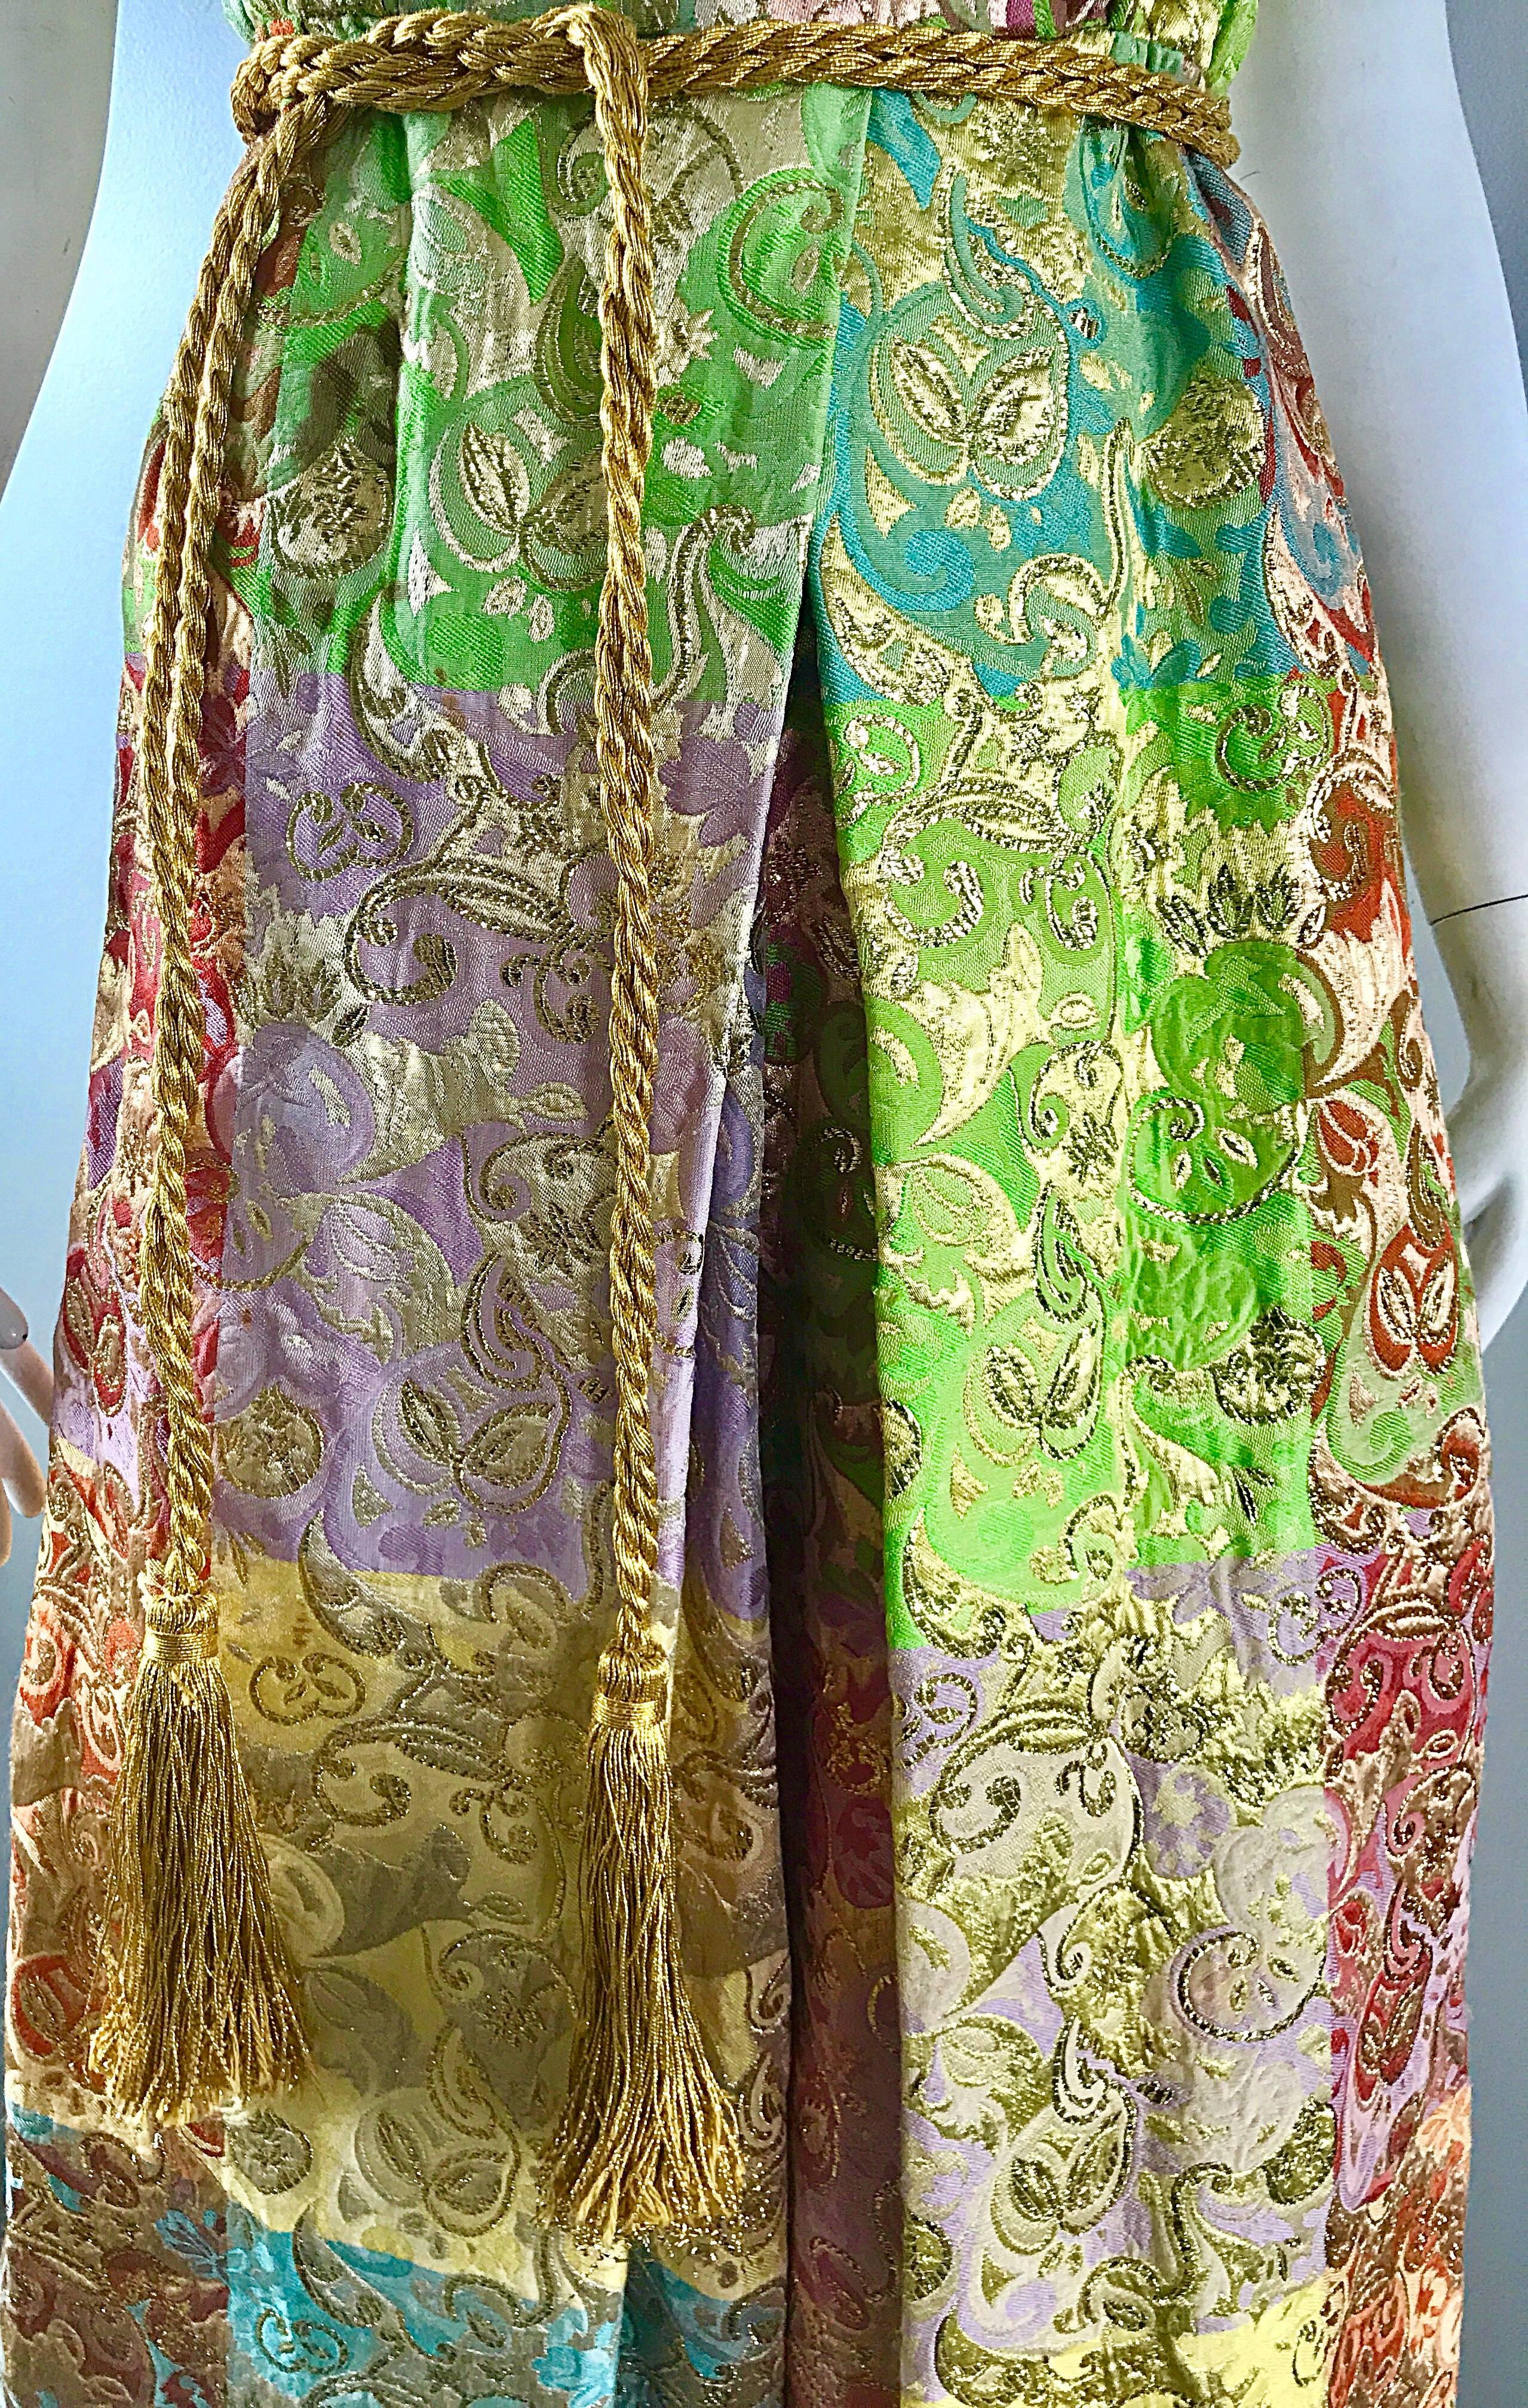 Unbelievable early 1970s JOSEPH MAGNIN silk brocade wide palazzo leg jumpsuit, with original GOLD tassel belt! Features amazing pastel colors of pink, purple, green, blue, yellow, and gold metallic in fabulous paisley prints! Extra wide legs provide